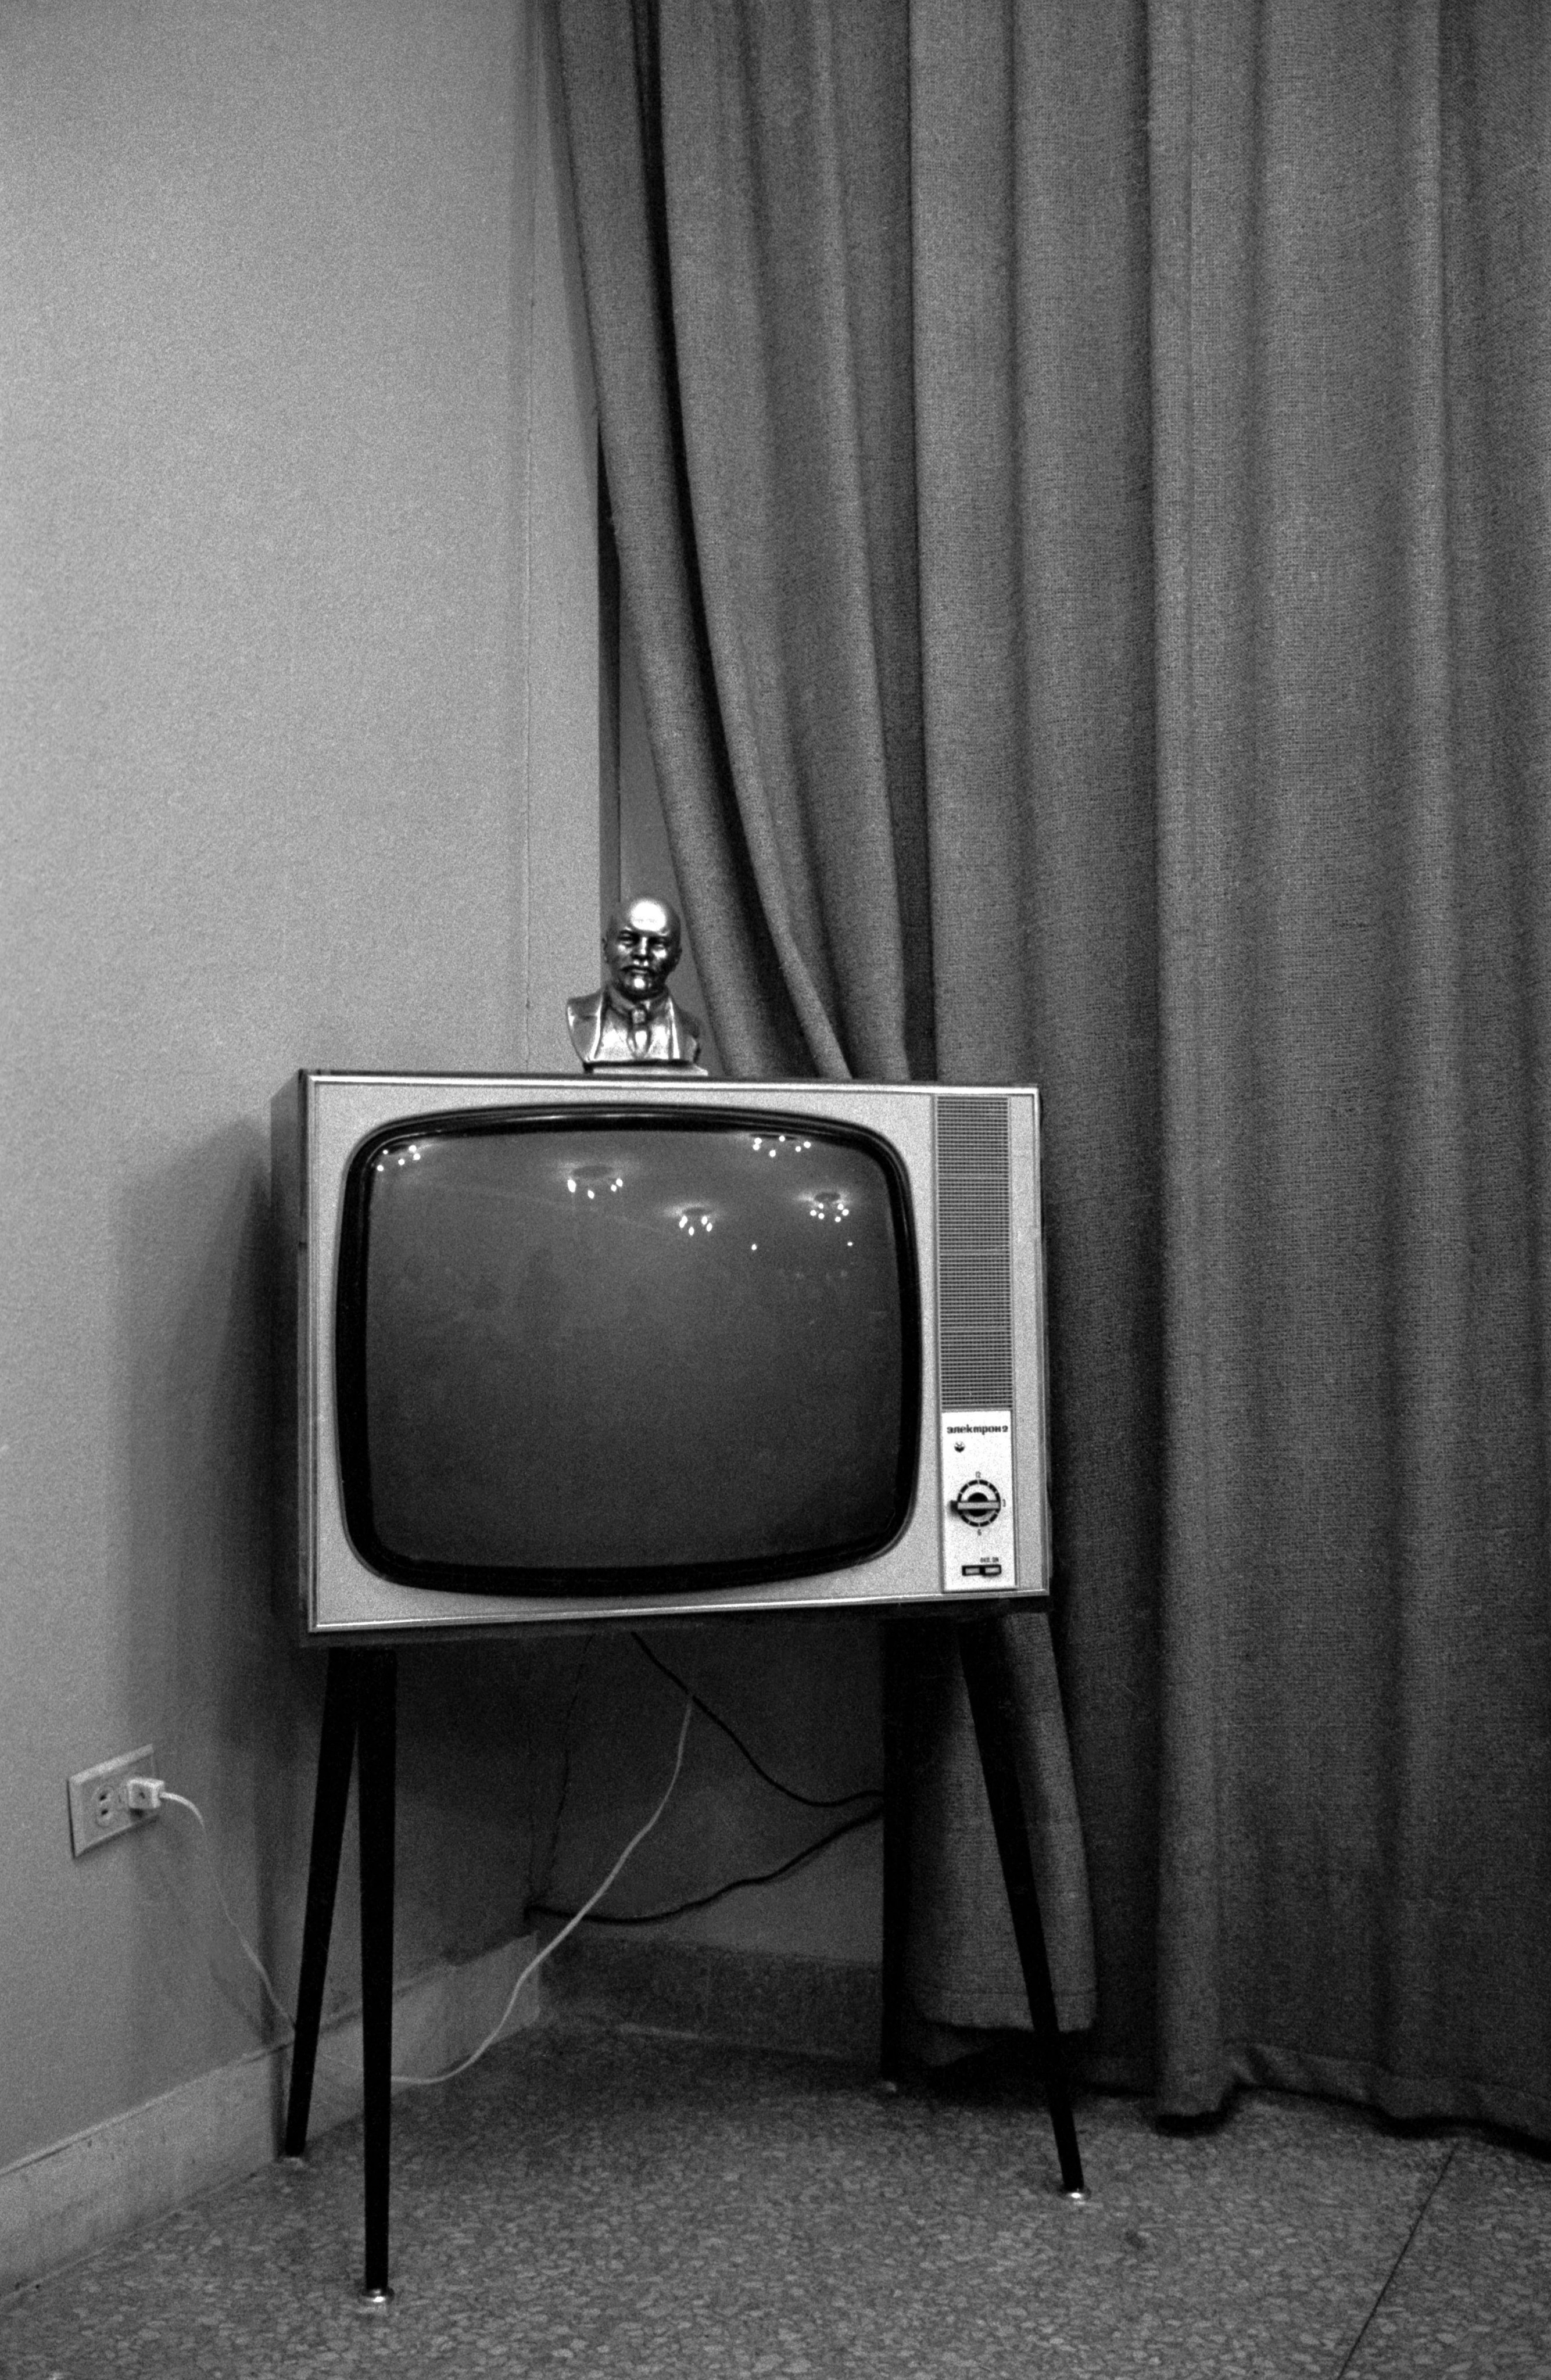 X 上的Magnum Photos：「Today we celebrate 90 years of #TV which was 1st publicly demonstrated by John Logie Baird on 26 January 1926. https://t.co/0EPSJNGf4z」 / X